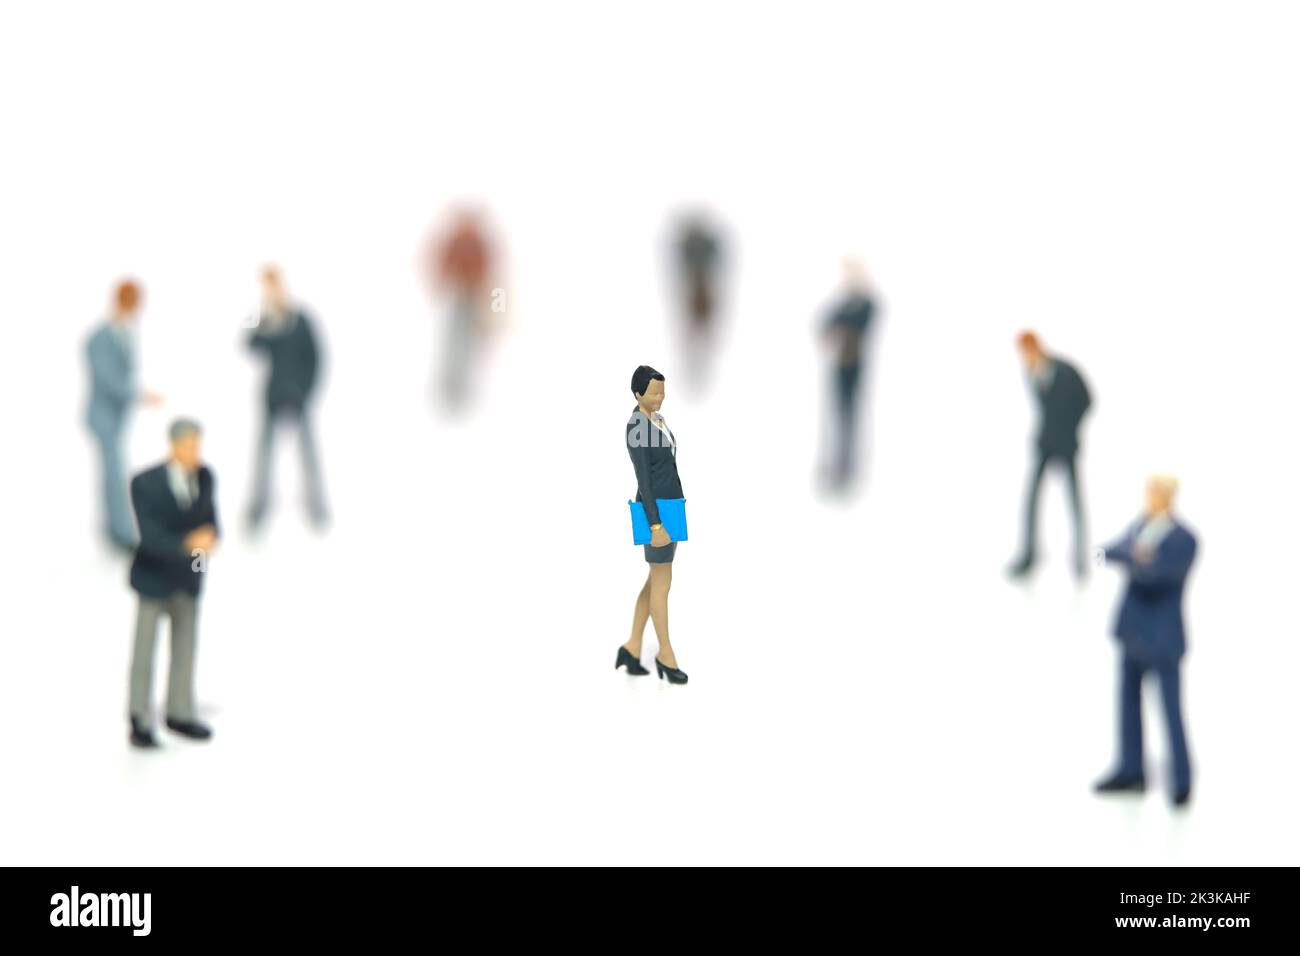 Miniature people toy figure photography. Women empowerment concept. A businesswoman standing in the middle of male people crowd. Isolated on white bac Stock Photo